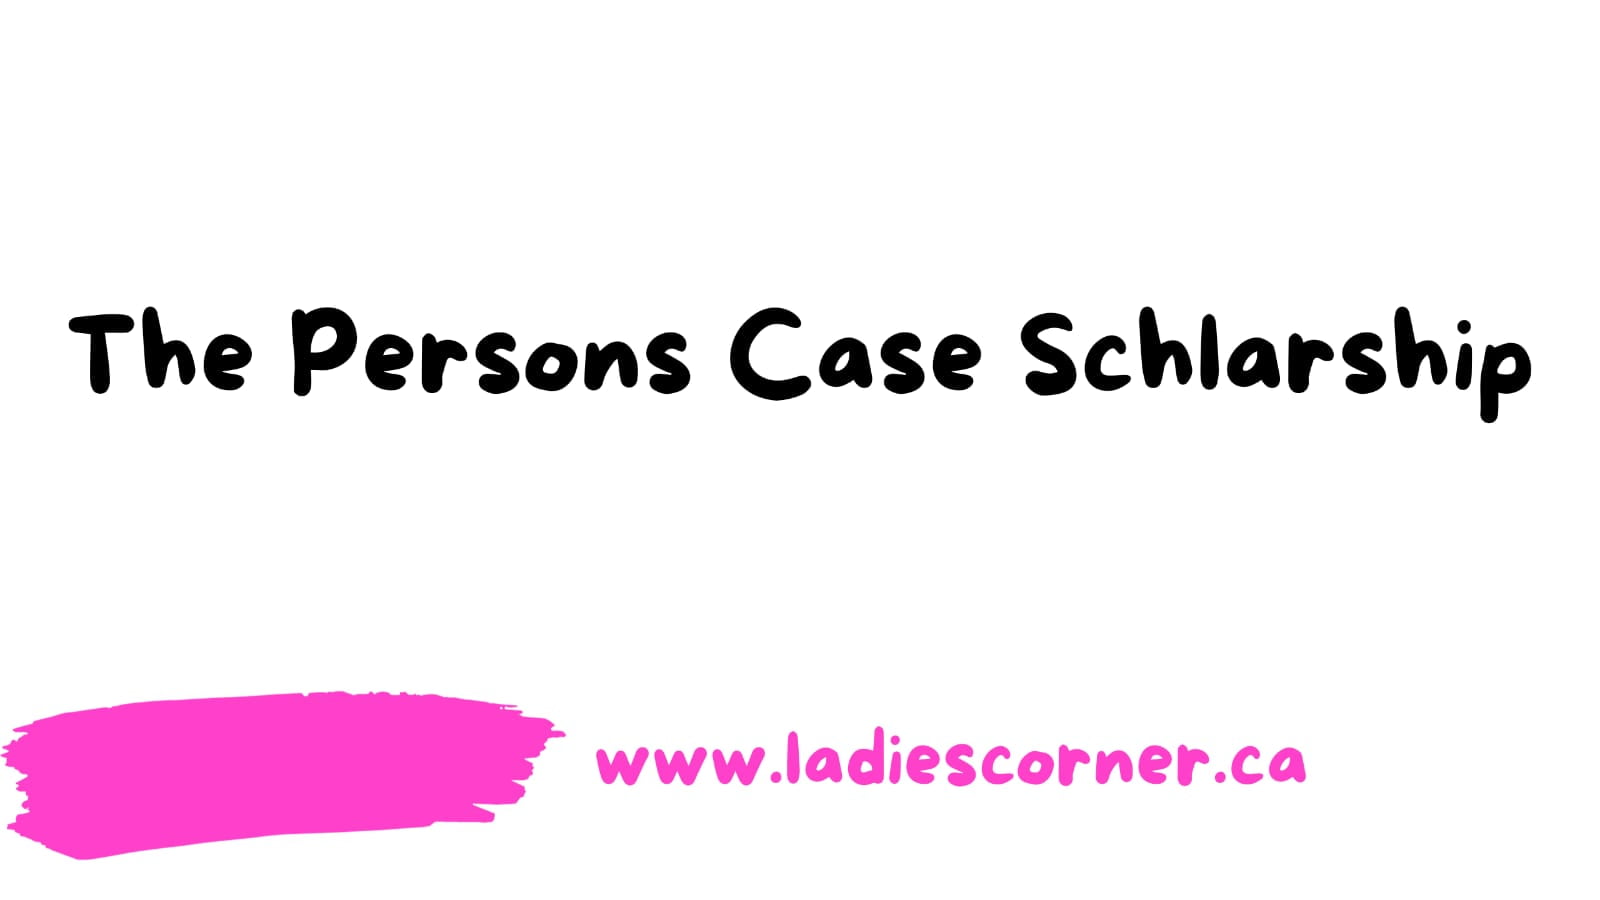 The Persons Case Schlarship